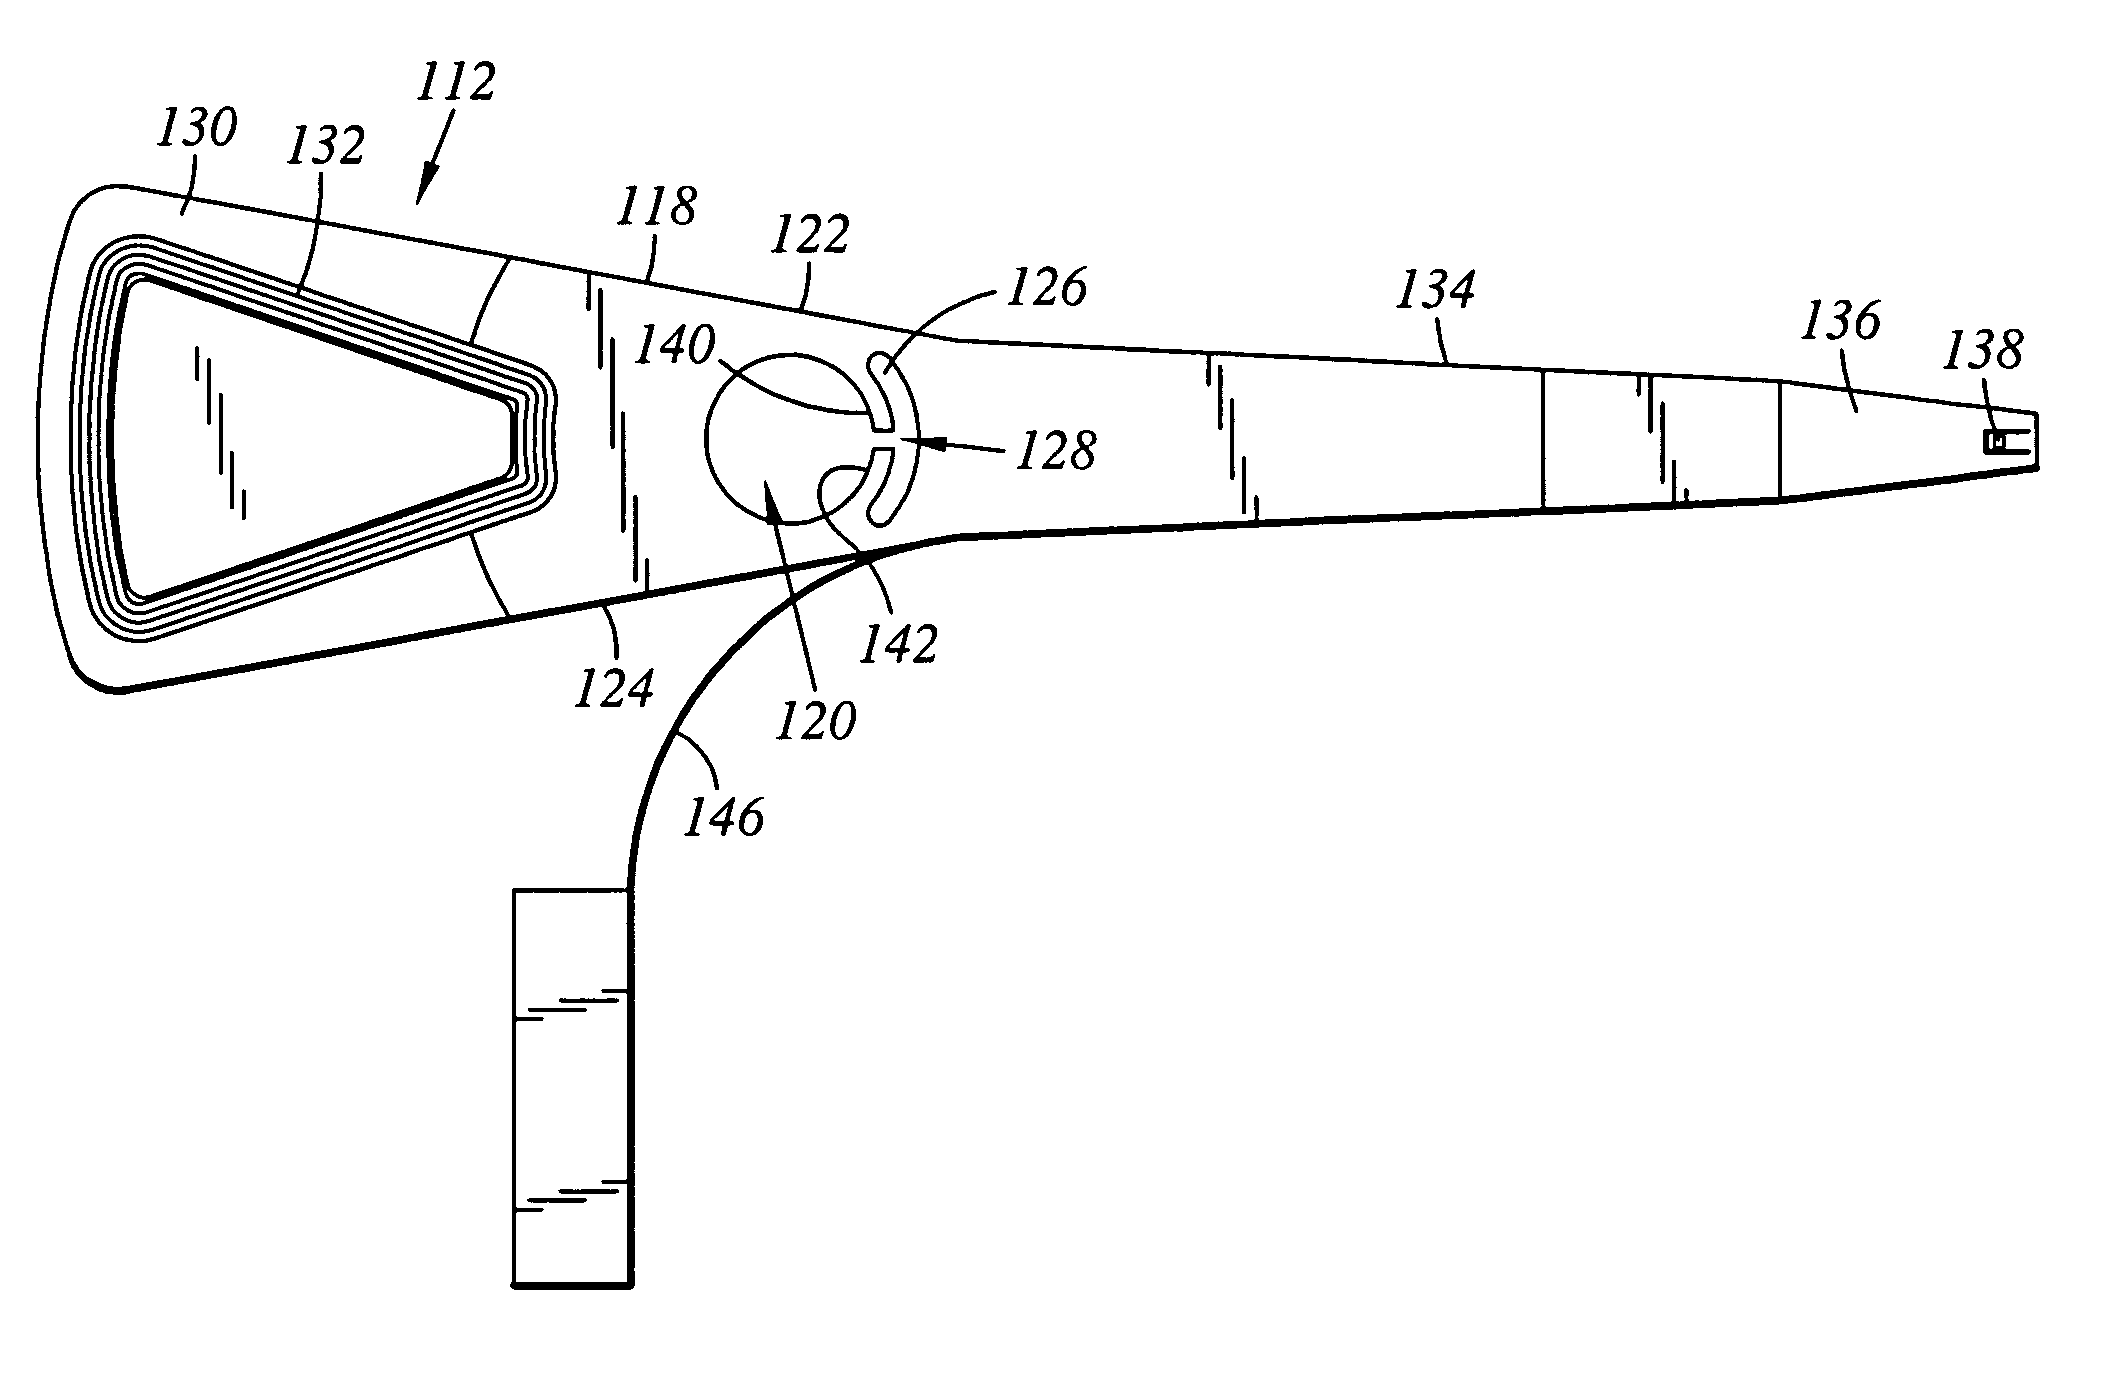 Head stack assembly having an actuator body with multiple slots adjacent to a bore